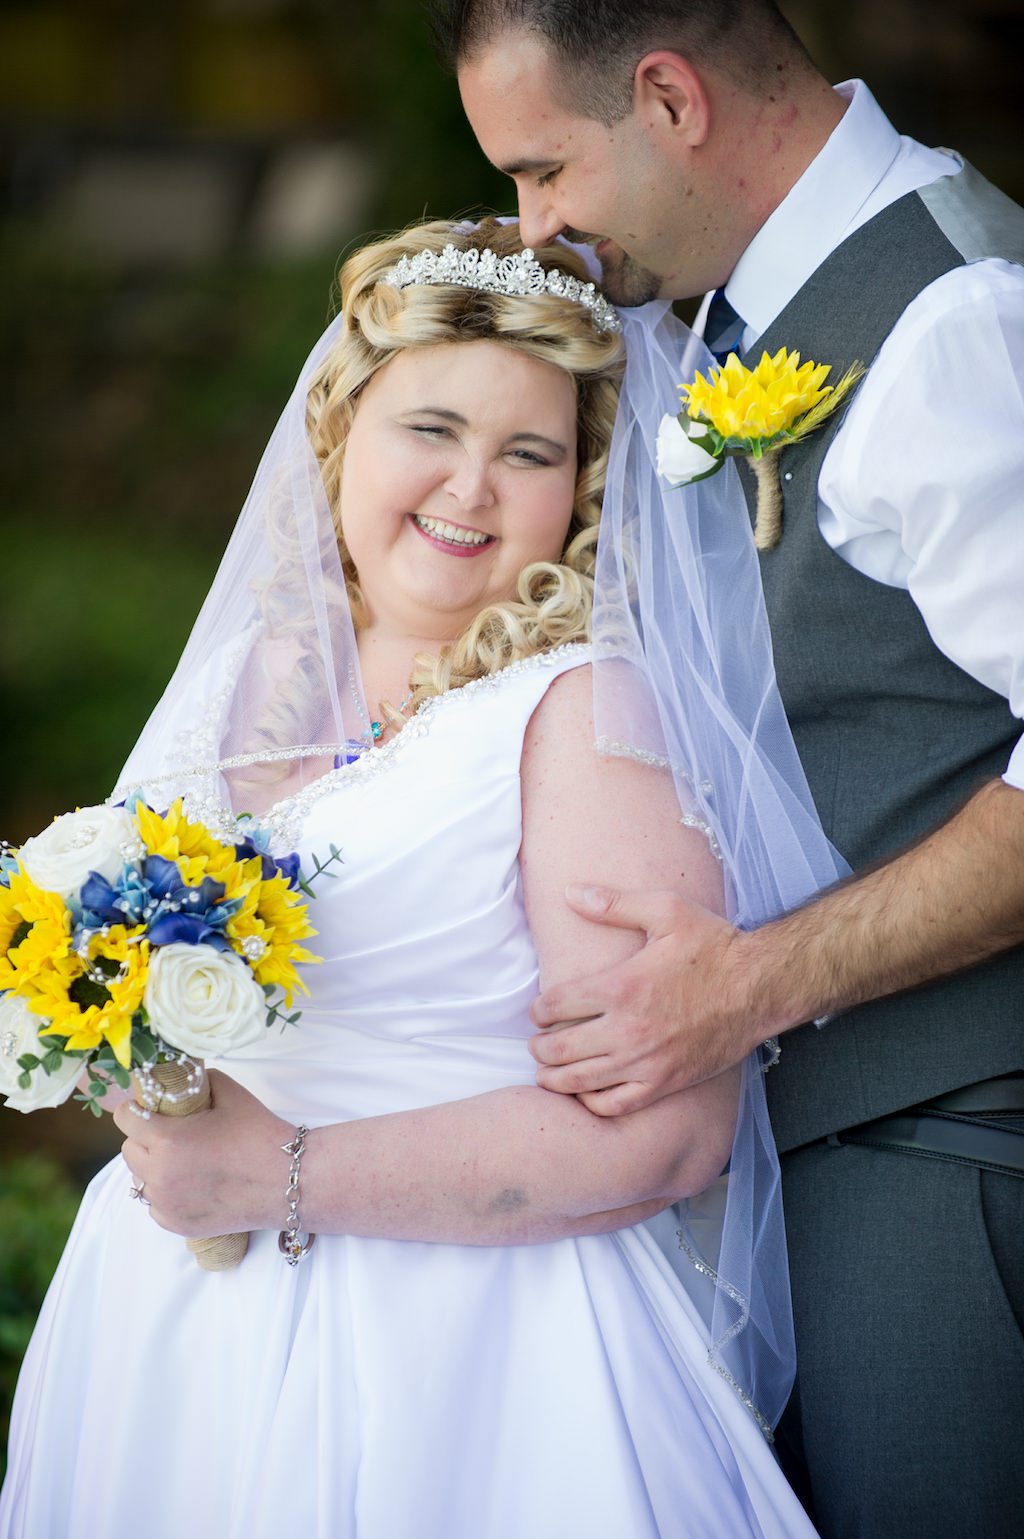 Outdoor Bride and Groom Portrait, Bride in Satin V-Neck Ballgown Wedding Dress with Straps and Rhinestone Beading, Beaded Headband and Veil with Yellow Sunflower, White Roses, Blue and Greenery Floral Bouquet, Groom in Grey Vest and Yellow Sunflower Boutonneire | Tampa Bay Photographer Andi Diamond Photography